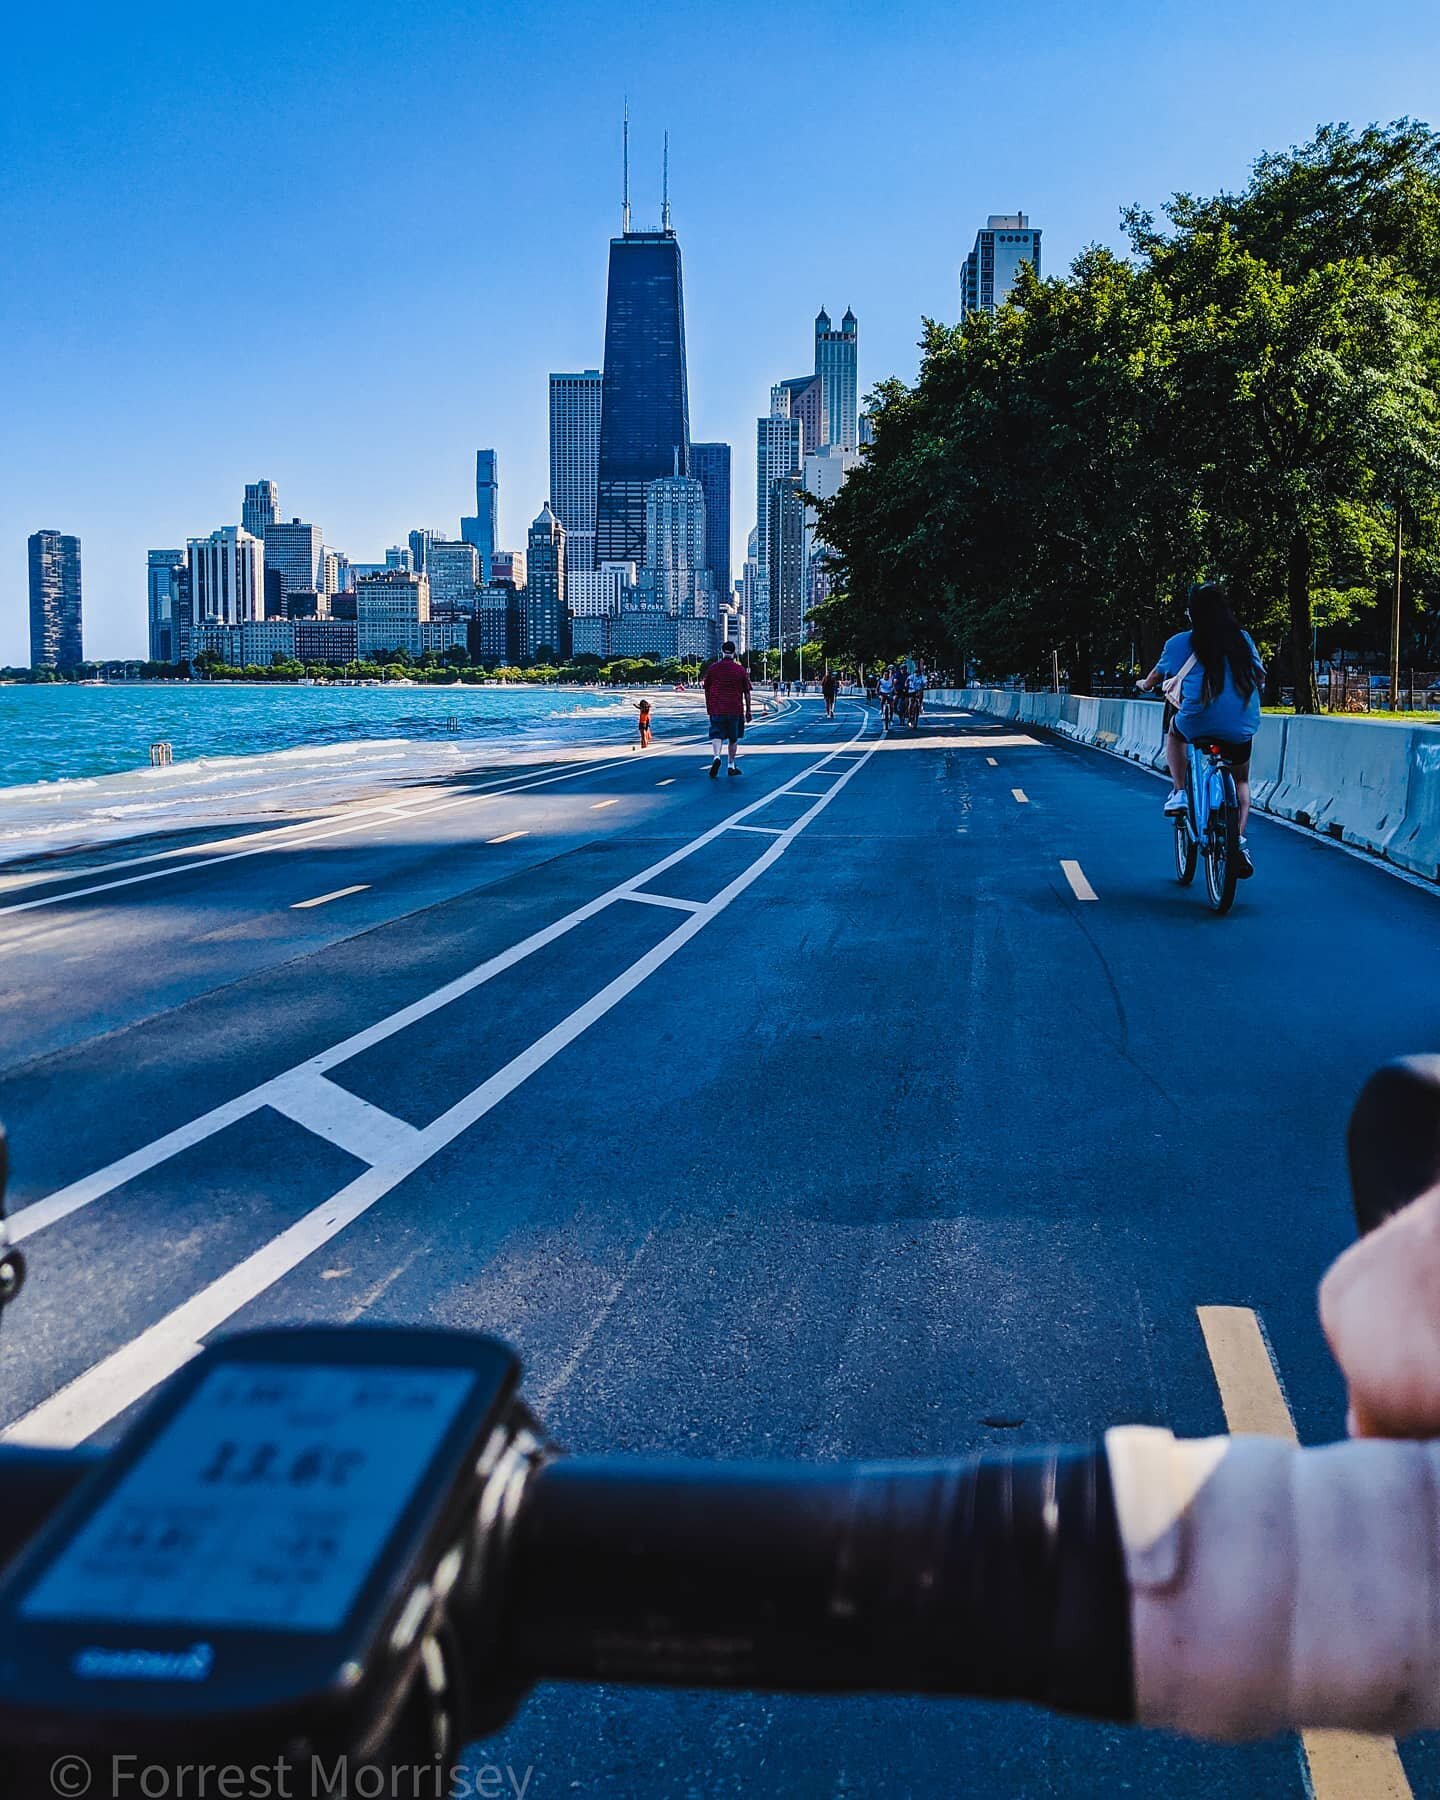 Snaking along Lake Michigan and dropping a pathlete on a Pinarello with my $200 Fixie is a fuckin rush.